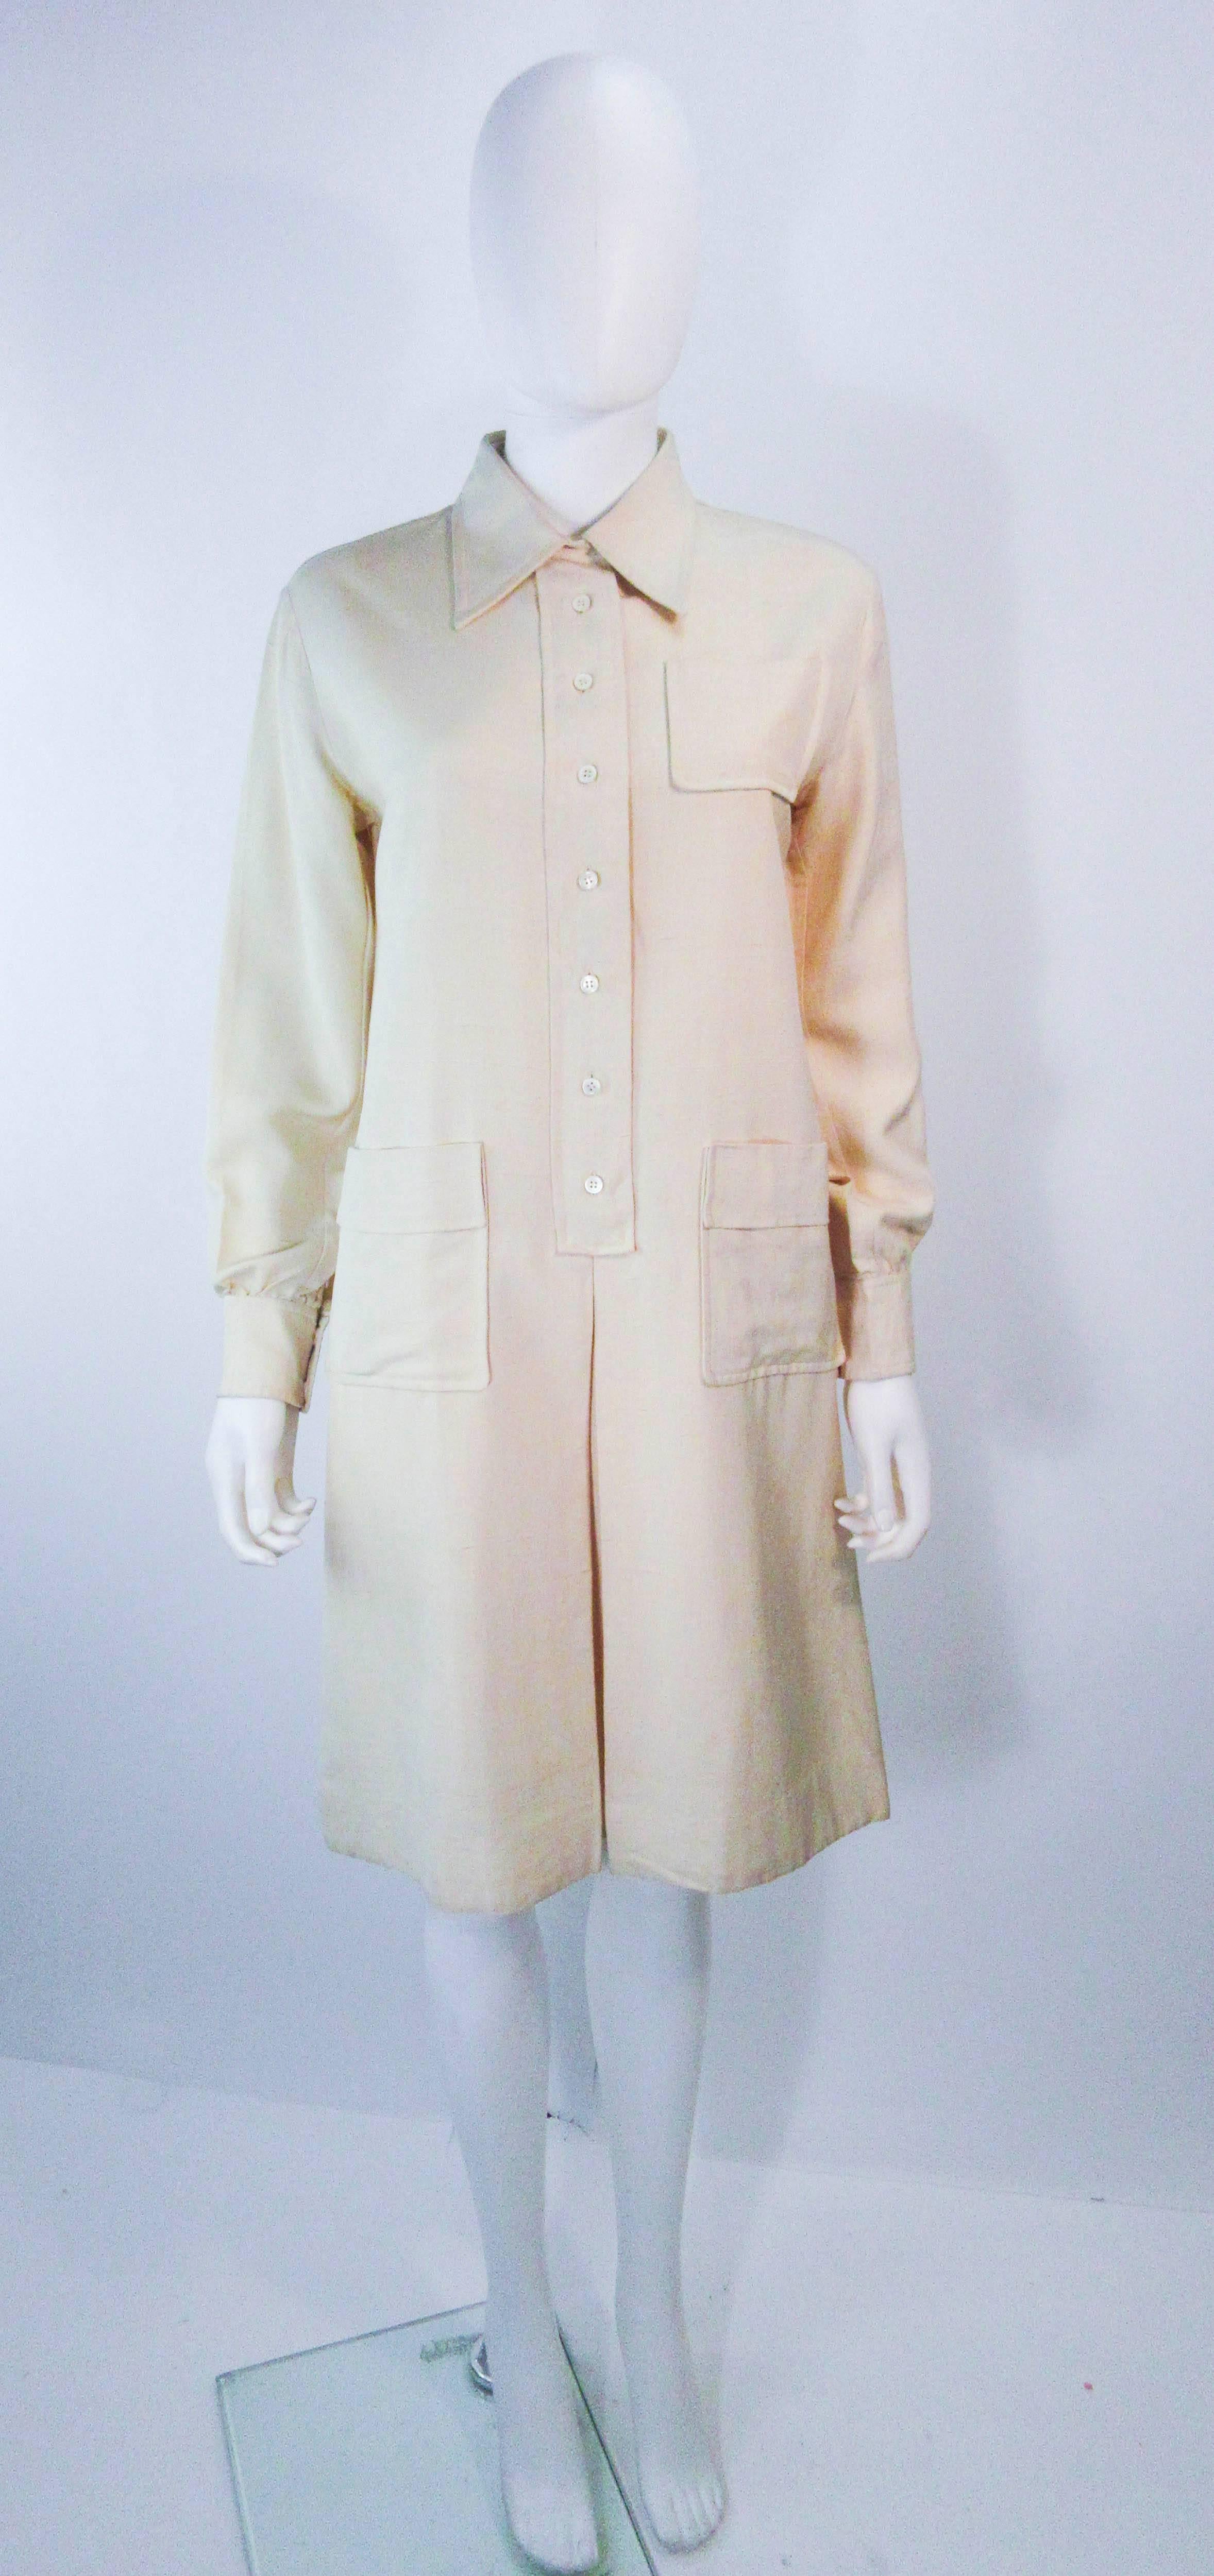 This Yves Saint Laurent dress is composed of a white linen & features a utility/safari style. There are center front button closures with front pockets. In great vintage condition there is some signs of wear due to age, the size and fabric content